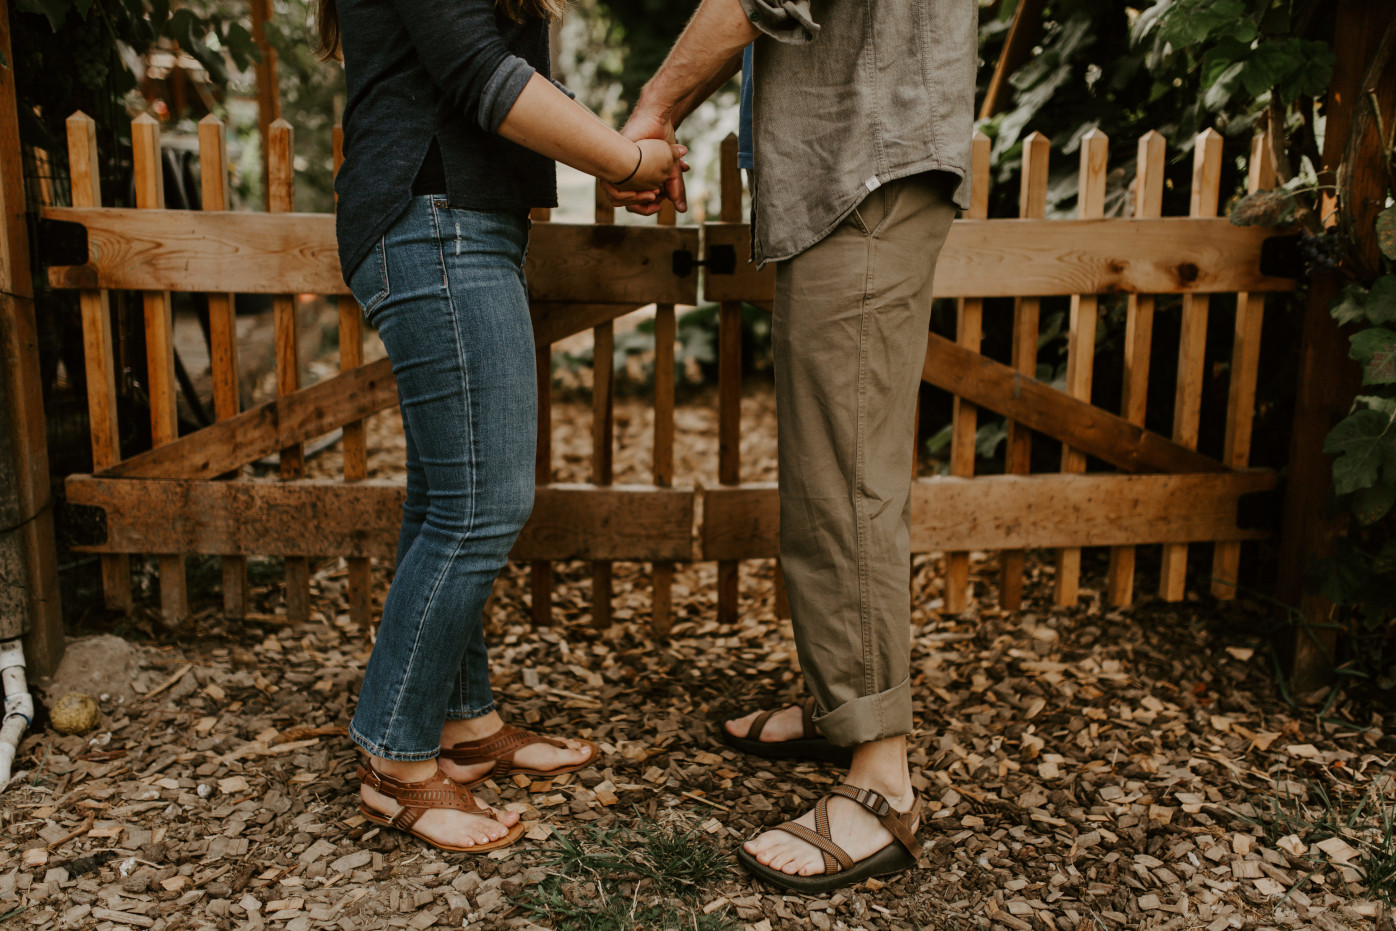 Hannah and Dan hold hands in Corvallis, Oregon during their Oregon Adventure. Intimate wedding photography in Corvallis Oregon by Sienna Plus Josh.